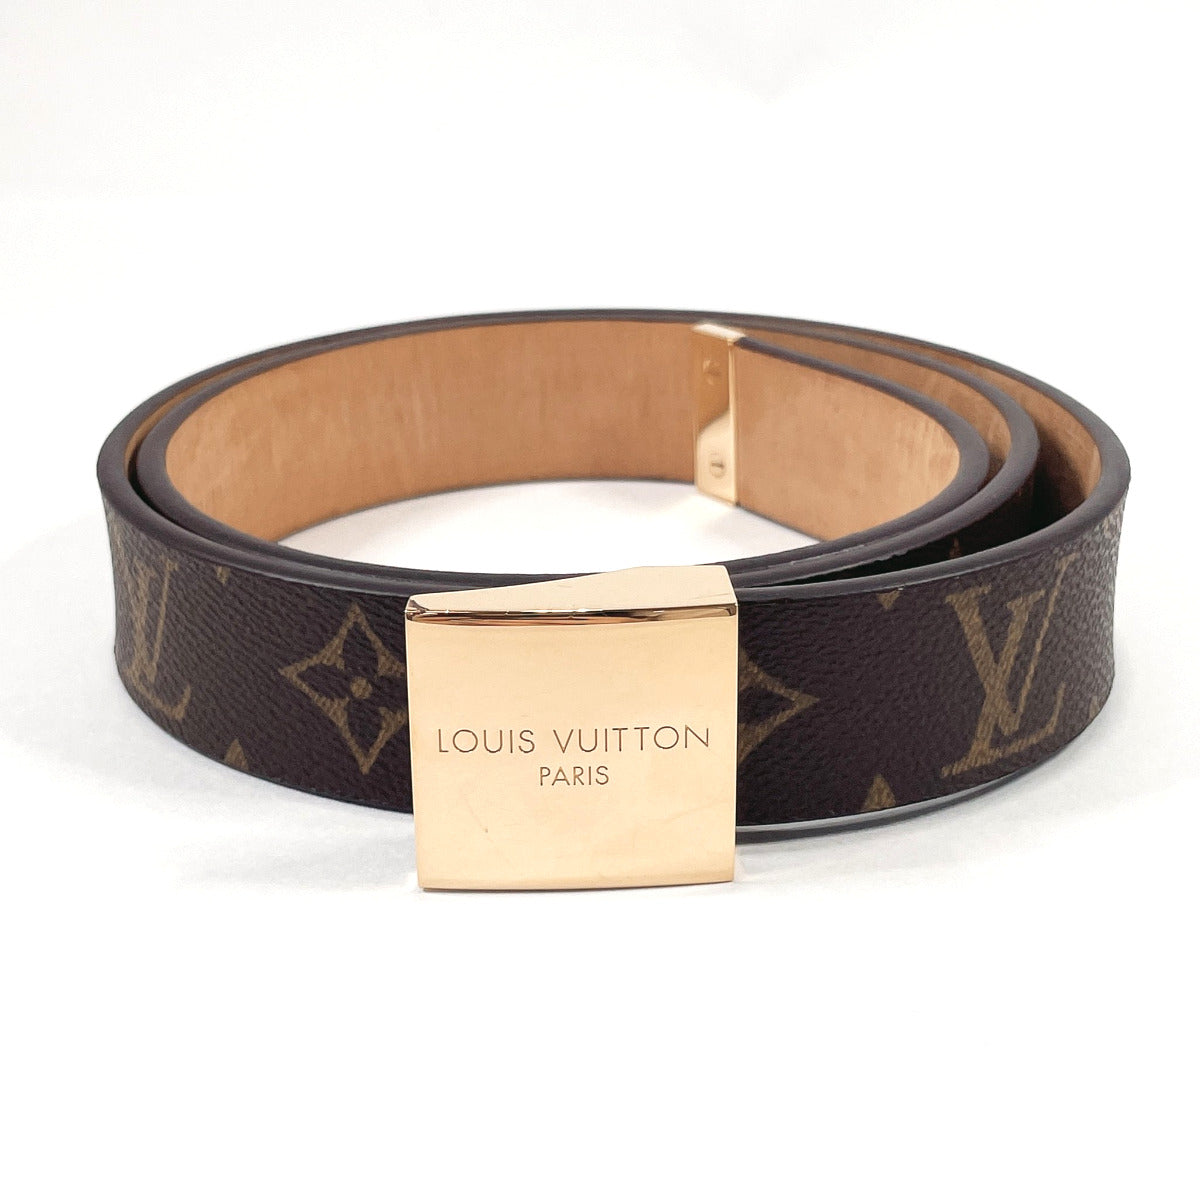 louis vuitton belt brown with gold buckle